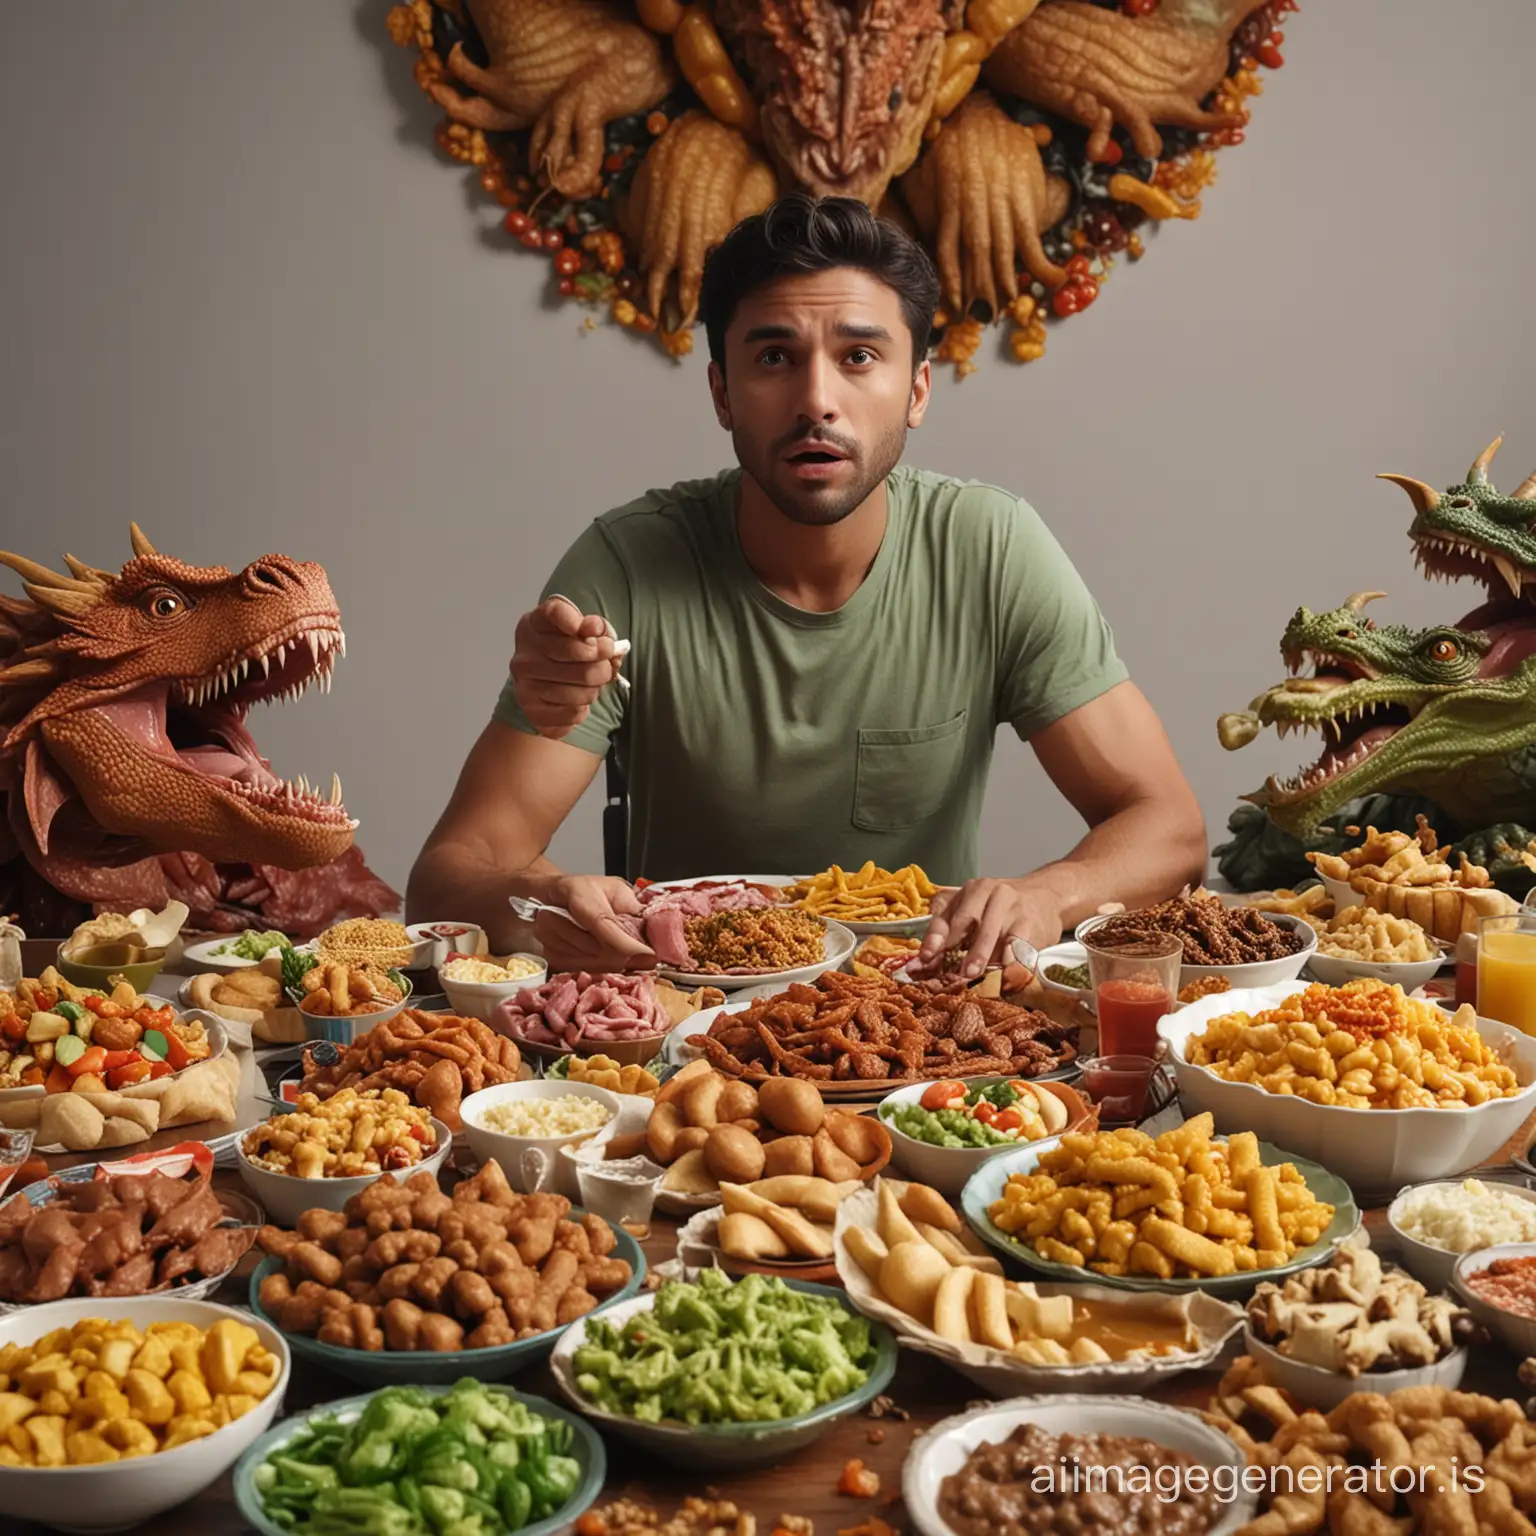 Arafed man sitting at a table with a lot of food, mukbang, kitava insatiable hunger, you being dragon food, eating alien food, food commercial 4 k, about to consume you, the table is full of food, super realistic food picture, disgusting food, food advertisement, eating meat, gluttony, realism art, semi realism